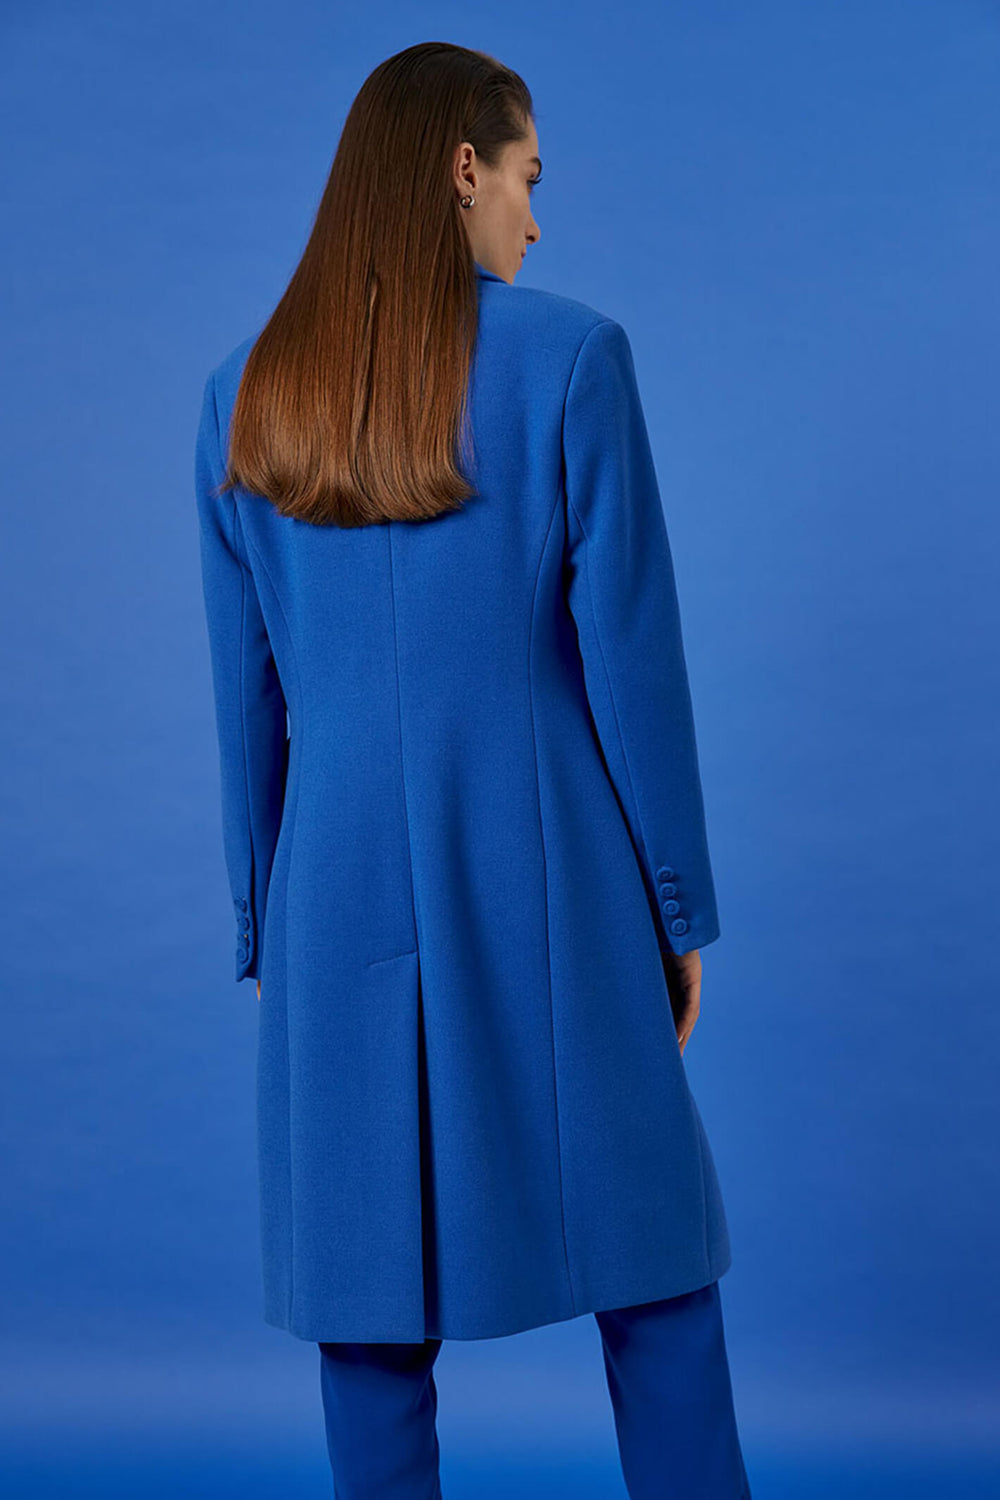 Access Fashion 9022-304 Royal Blue Double Breasted Coat - Experience Boutique